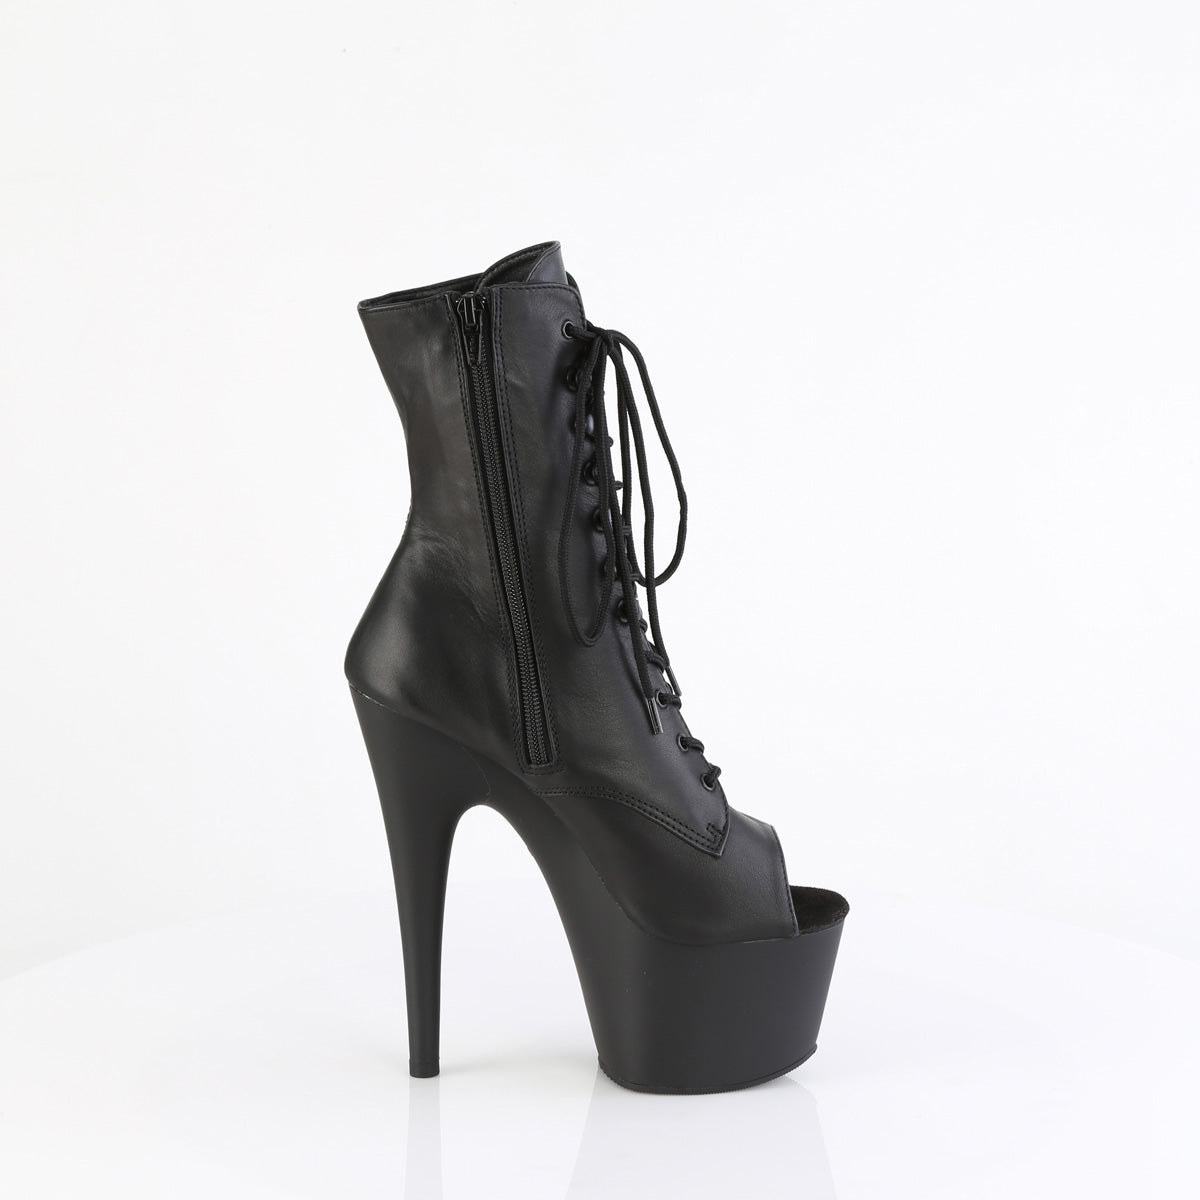 ADORE-1021 Pleaser Sexy Black Open Toe Pole Dancing Ankle Boots